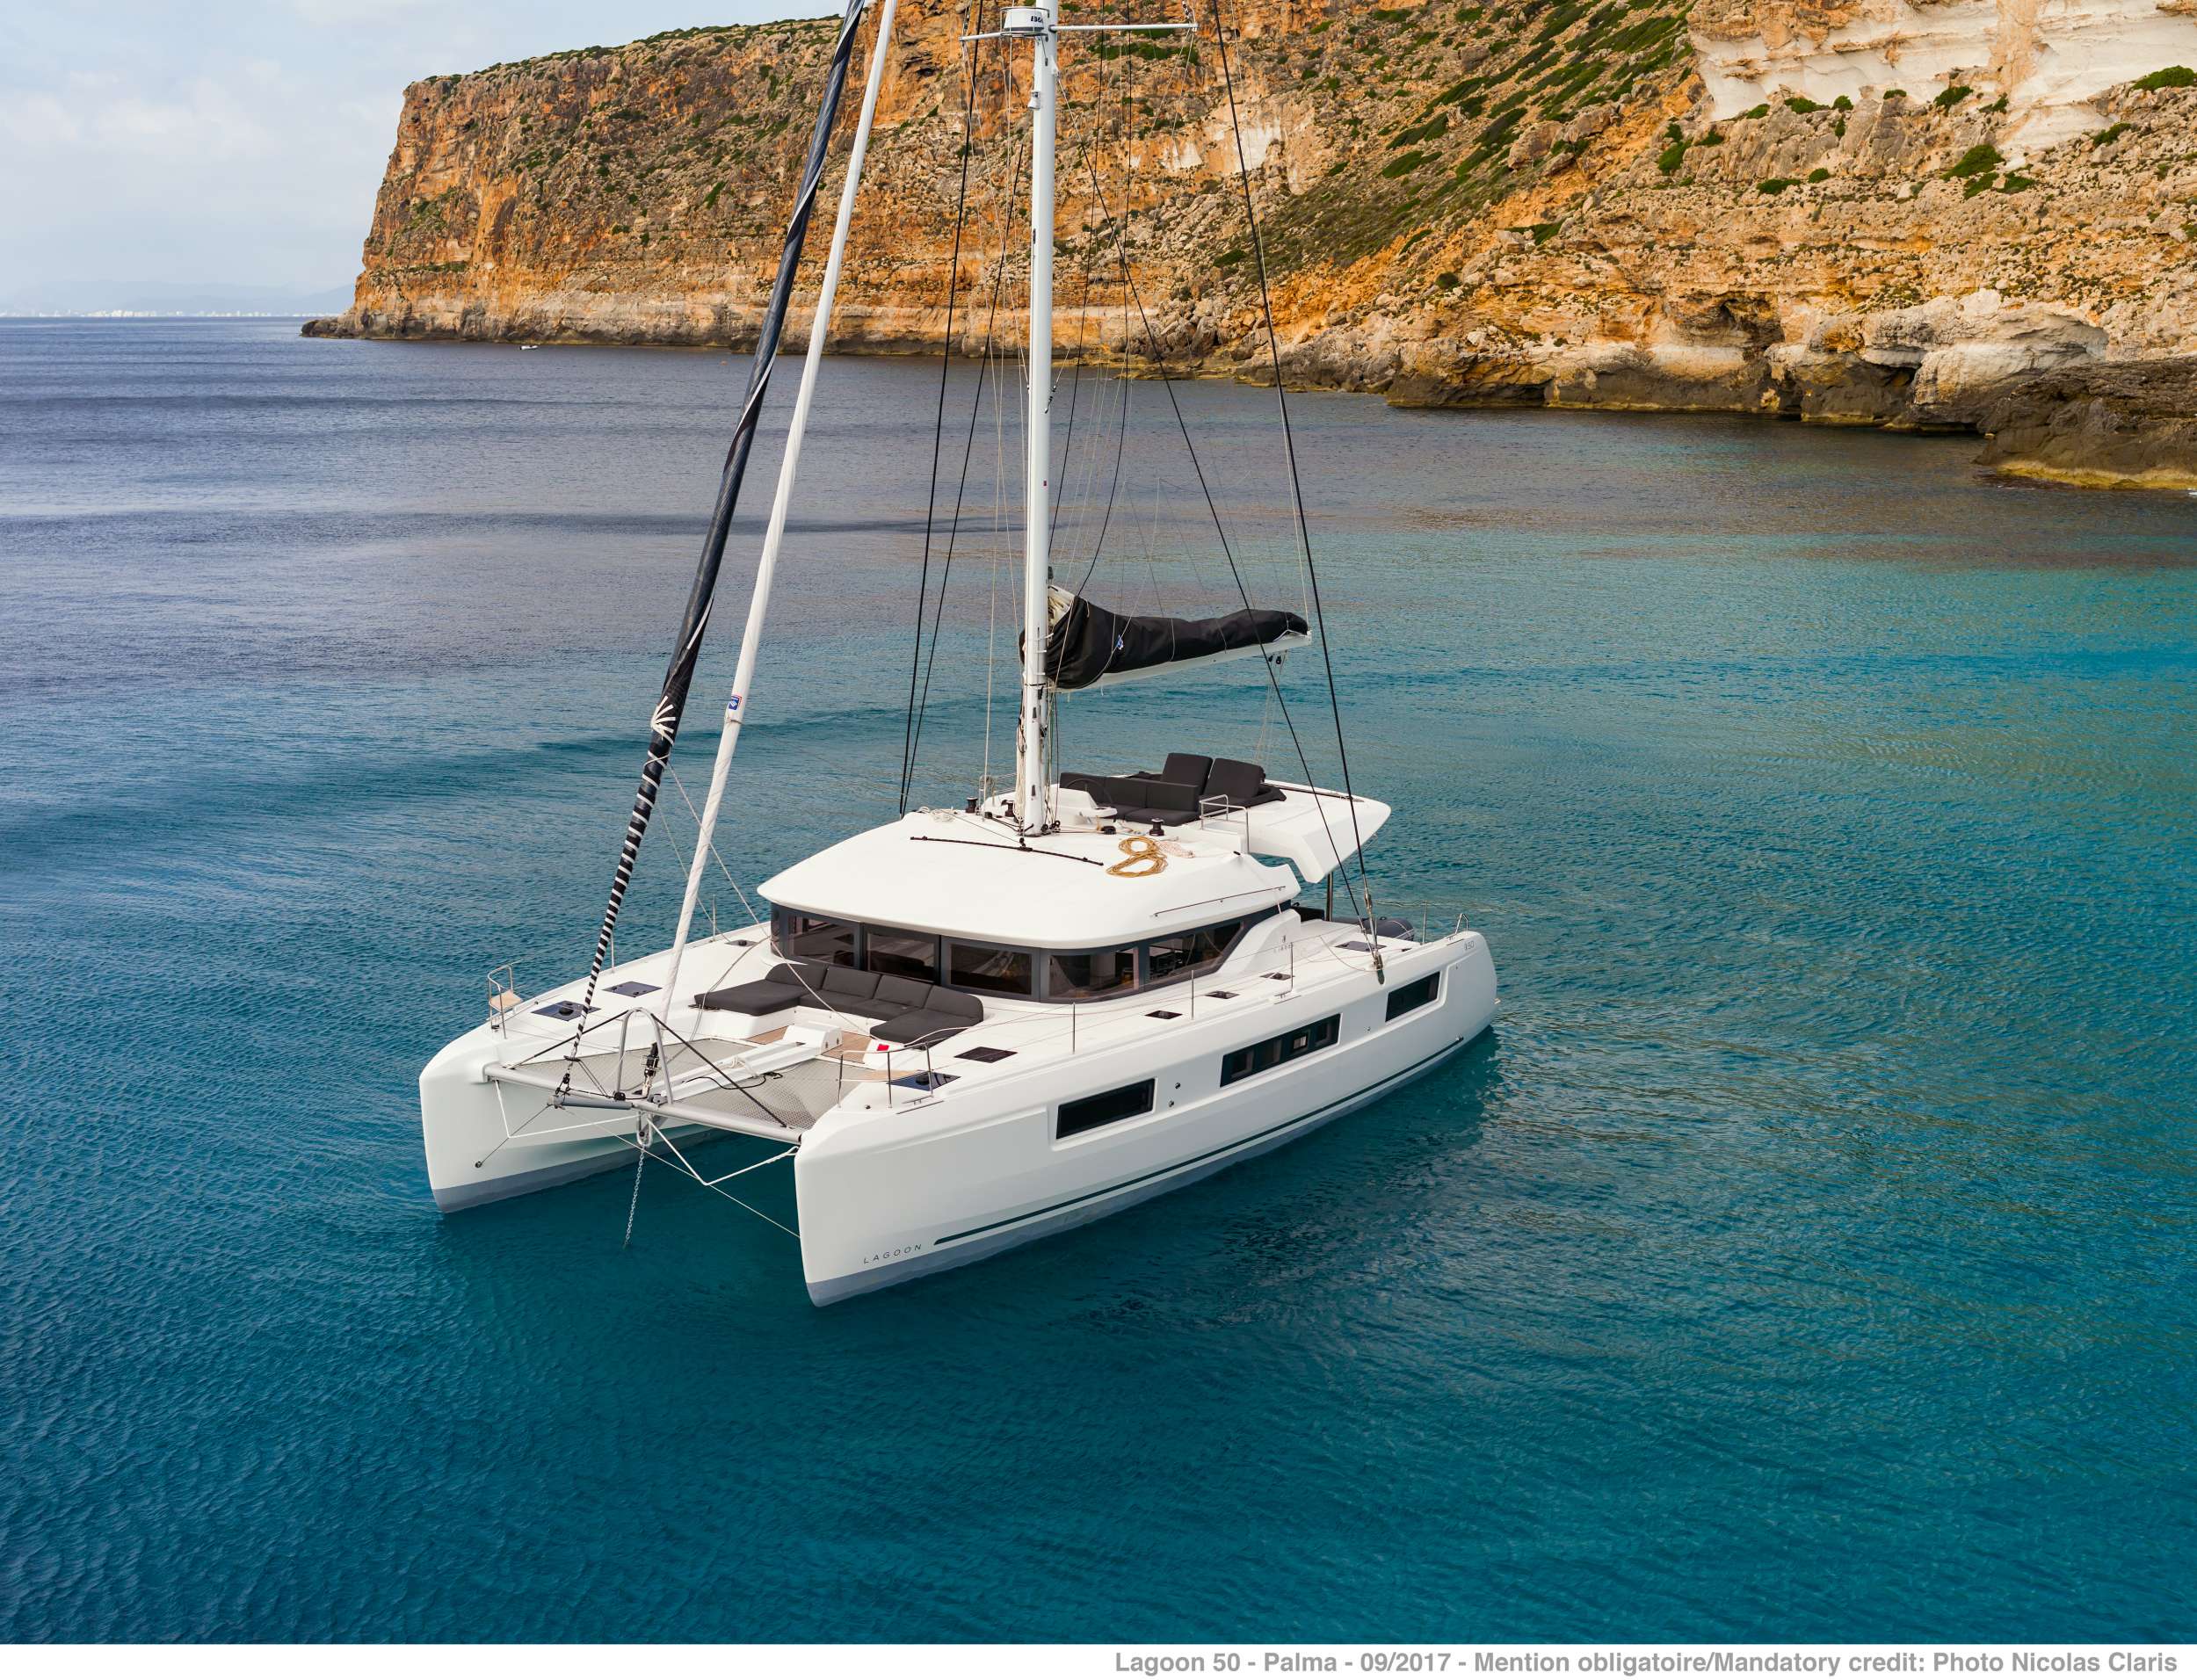 ONEIDA 2 - Yacht Charter Palairos & Boat hire in Greece 1